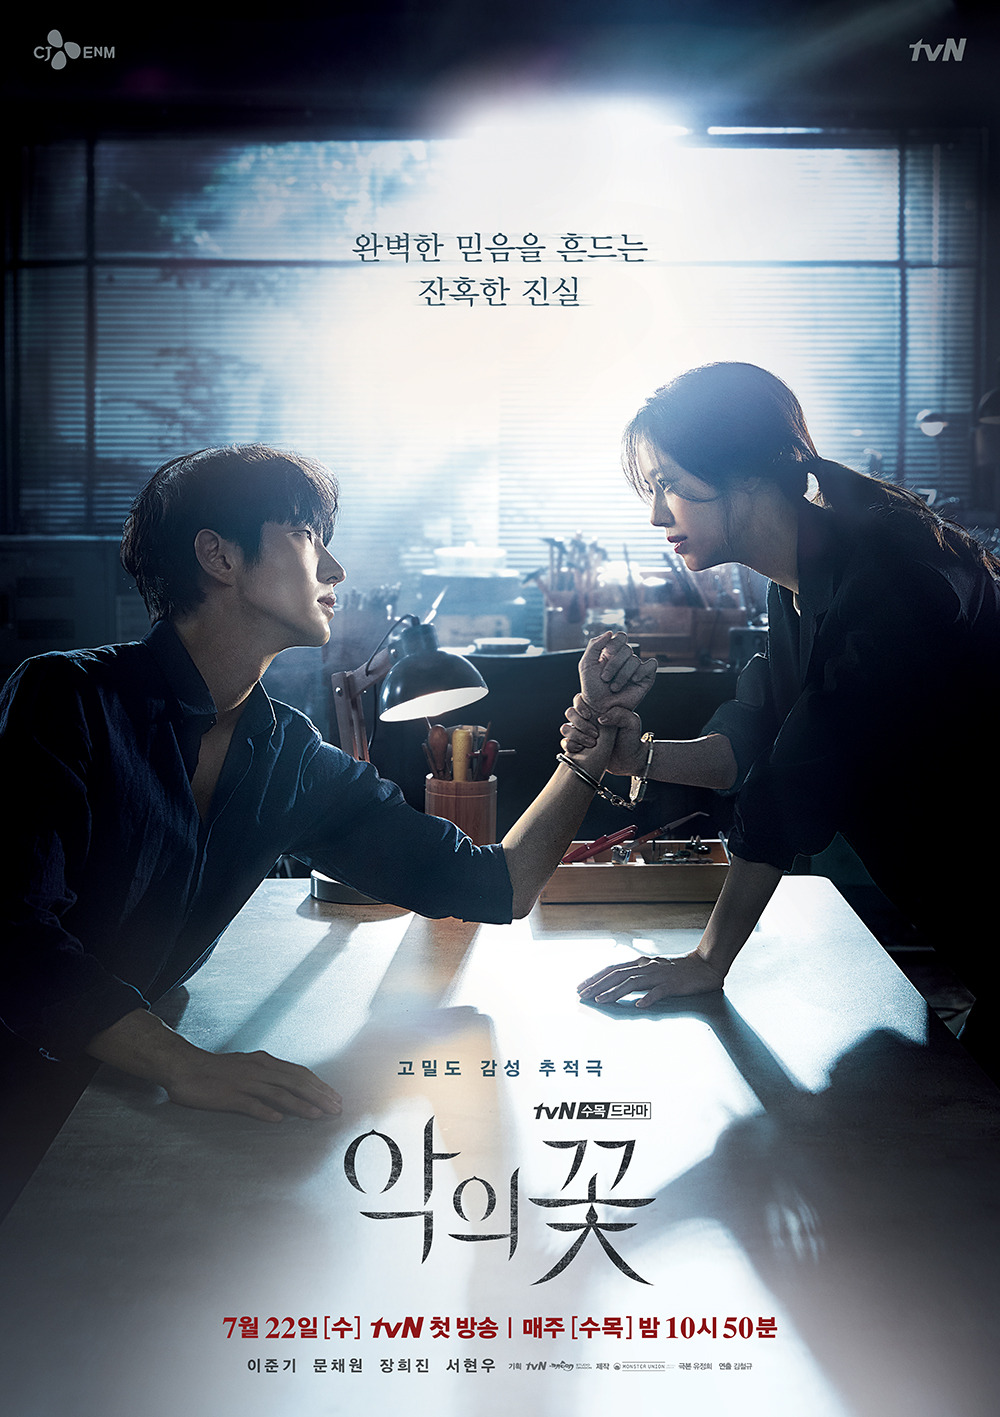 Seoul = = The Flower of Evil  is confirmed for the first broadcast in July, and it is foreshadowing the high density tension between Lee Joon-gi and Moon Chae-won.TVNs new drama The Flower of Evil (directed by Kim Cheol-gyu/playplayplay by Yoo Jung-hee), which confirmed its first broadcast at 10:50 p.m. on July 22, is a high-density emotional tracking drama of two people facing the truth that they want to ignore, including Baek Hee-sung (Lee Joon-gi), the man who even played love, and his wife Chae-won (Moon Chae-won), who started to doubt his reality.In the daily life of the couple Baek Hee-sung and the car support who had been happy with their daughter Baek Eun-ha (her daughter, Seo-yeon), What if the husband who has loved for 14 years is suspected of being a serial killer?And the original suspense melody that no one can predict will be unfolded.With Lee Joon-gi (played by Baek Hee-sung) and Moon Chae-won (played by Cha Ji-won)s dense melo chemistry and delicate emotional acting expected, the public poster suddenly focuses attention with two people handcuffed each others wrists.Especially, the workshop of Baek Hee Sung, a metal craftsman in the play, seems to have turned into an interrogation room, and a carpenter with a sharp detectives eyes is confronted with him with his desk in the middle.Baek Hee-sungs cool expression, which gazes at her with a hand out of hand, doubles the mysterious tension, and the car support holds his wrist as if he will arrest him at once, but the complex subtle feelings are in his eyes.The phrase cruel truth that shakes perfect faith also implies The Flower of Evil  that bloomed between the two, and it makes viewers wait for what Baek Hee-sung hid and what carts to dig into will witness.The production team of Flower of Evil said, There are complex emotions that can not be expressed in words between Baek Hee Sung and Cha Ji Won.In order to express the relationship and composition more delicately, both Lee Joon-gi and Moon Chae-won discussed the concept more carefully and worked enthusiastically while monitoring it together in the middle. All actors and staff are working hard to make the best results. I would like to expect a lot of expectations until the first broadcast.On the other handThe Flower of Evil  is a drama that coincides with the original script of Yoo Jung-hee, Lee Joon-gi, Moon Chae-won, Jang Hee-jin and Seo Hyun-woos Actor, who have a solid writing and a solid writing by director Kim Chul-gyu of Confession, Mother